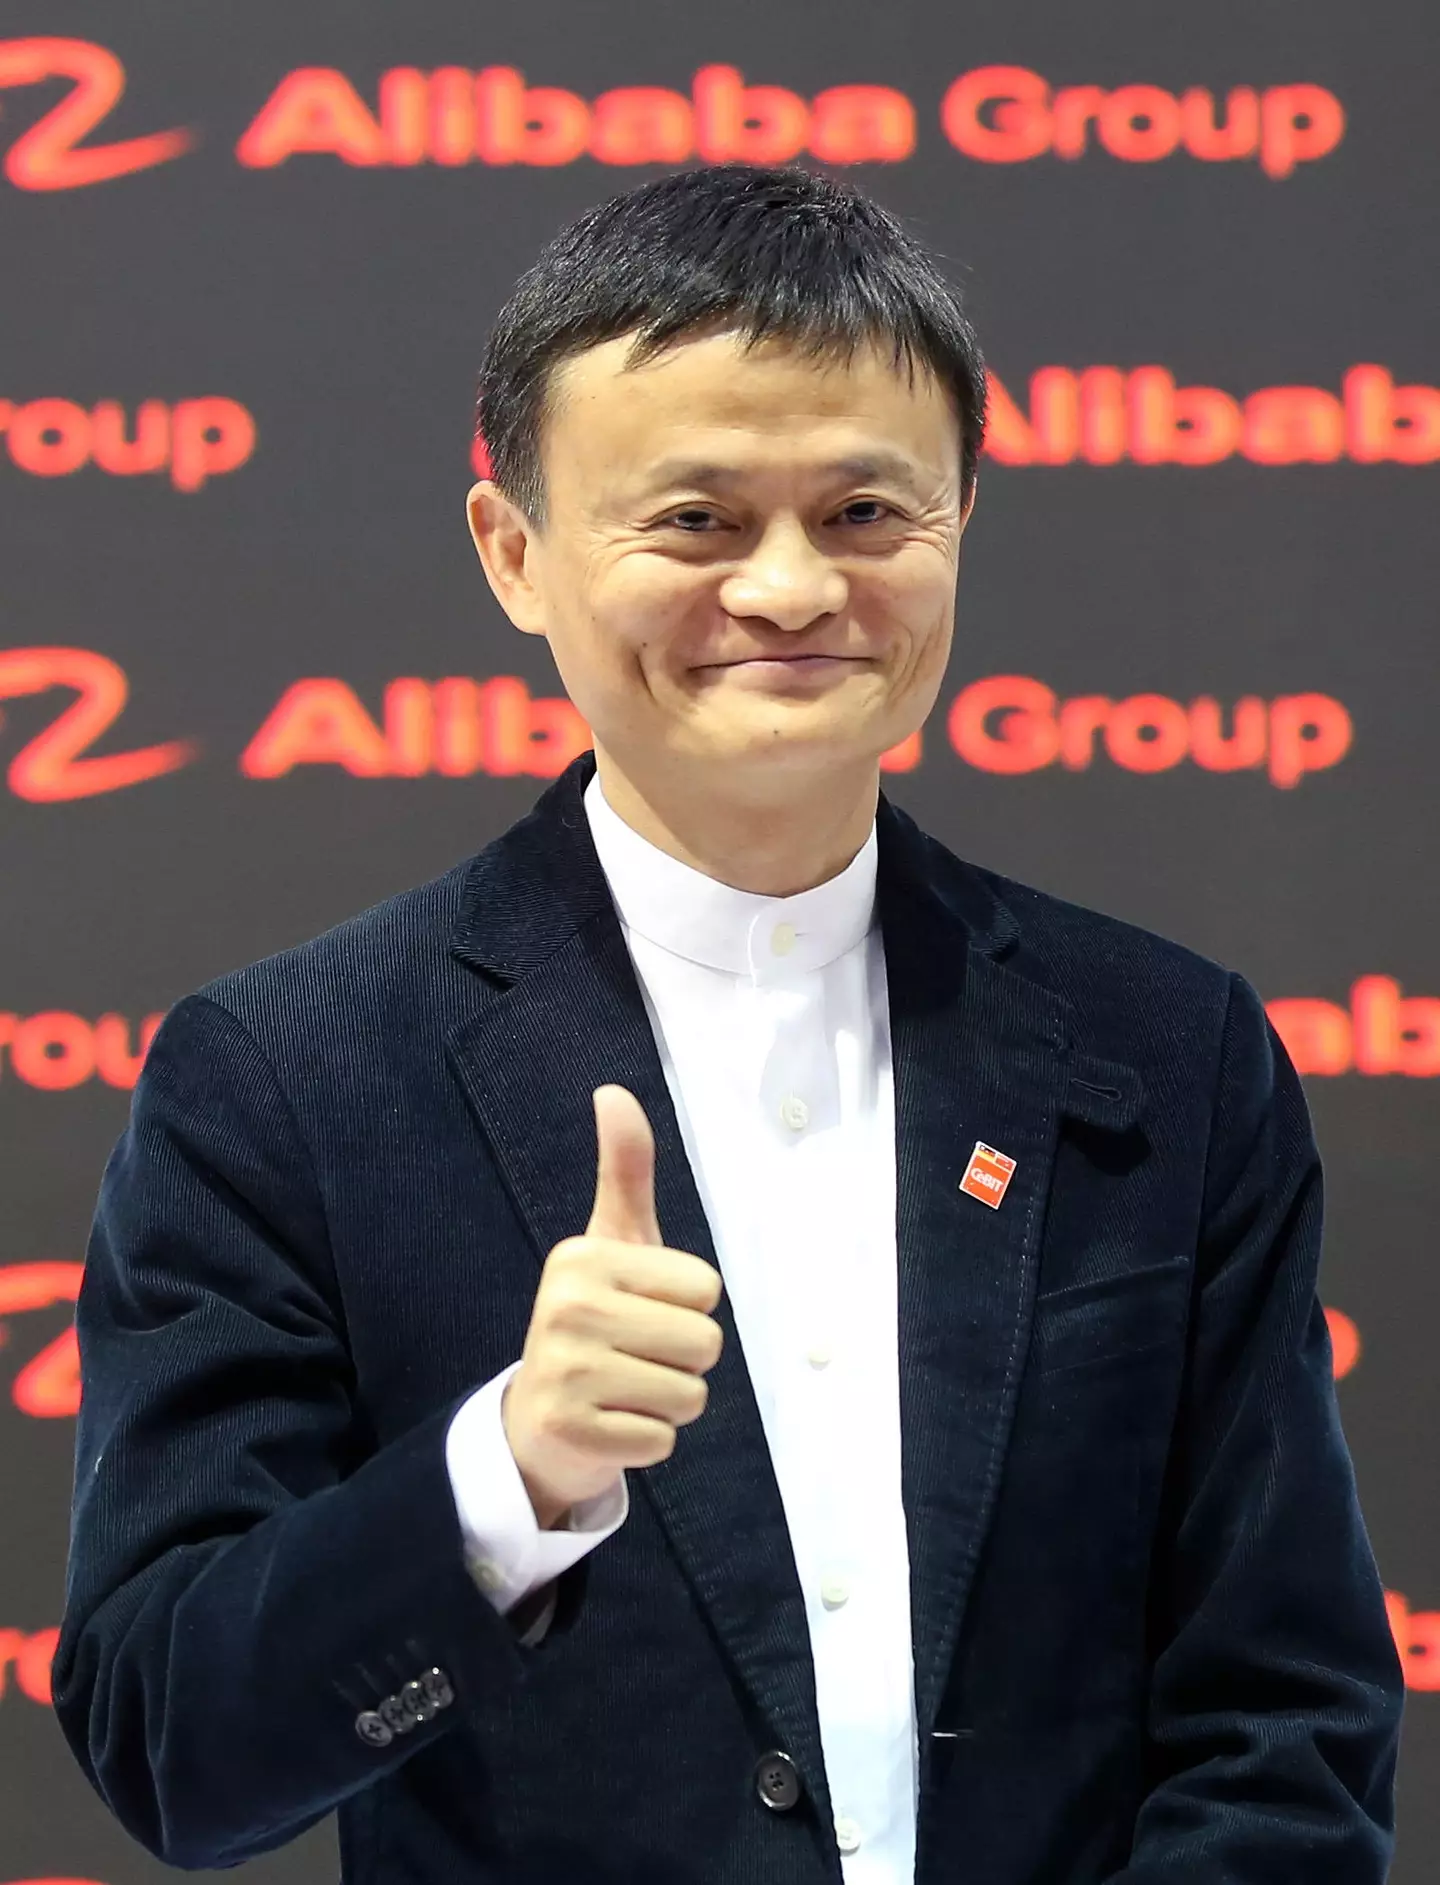 Jack Ma is relinquishing his power.